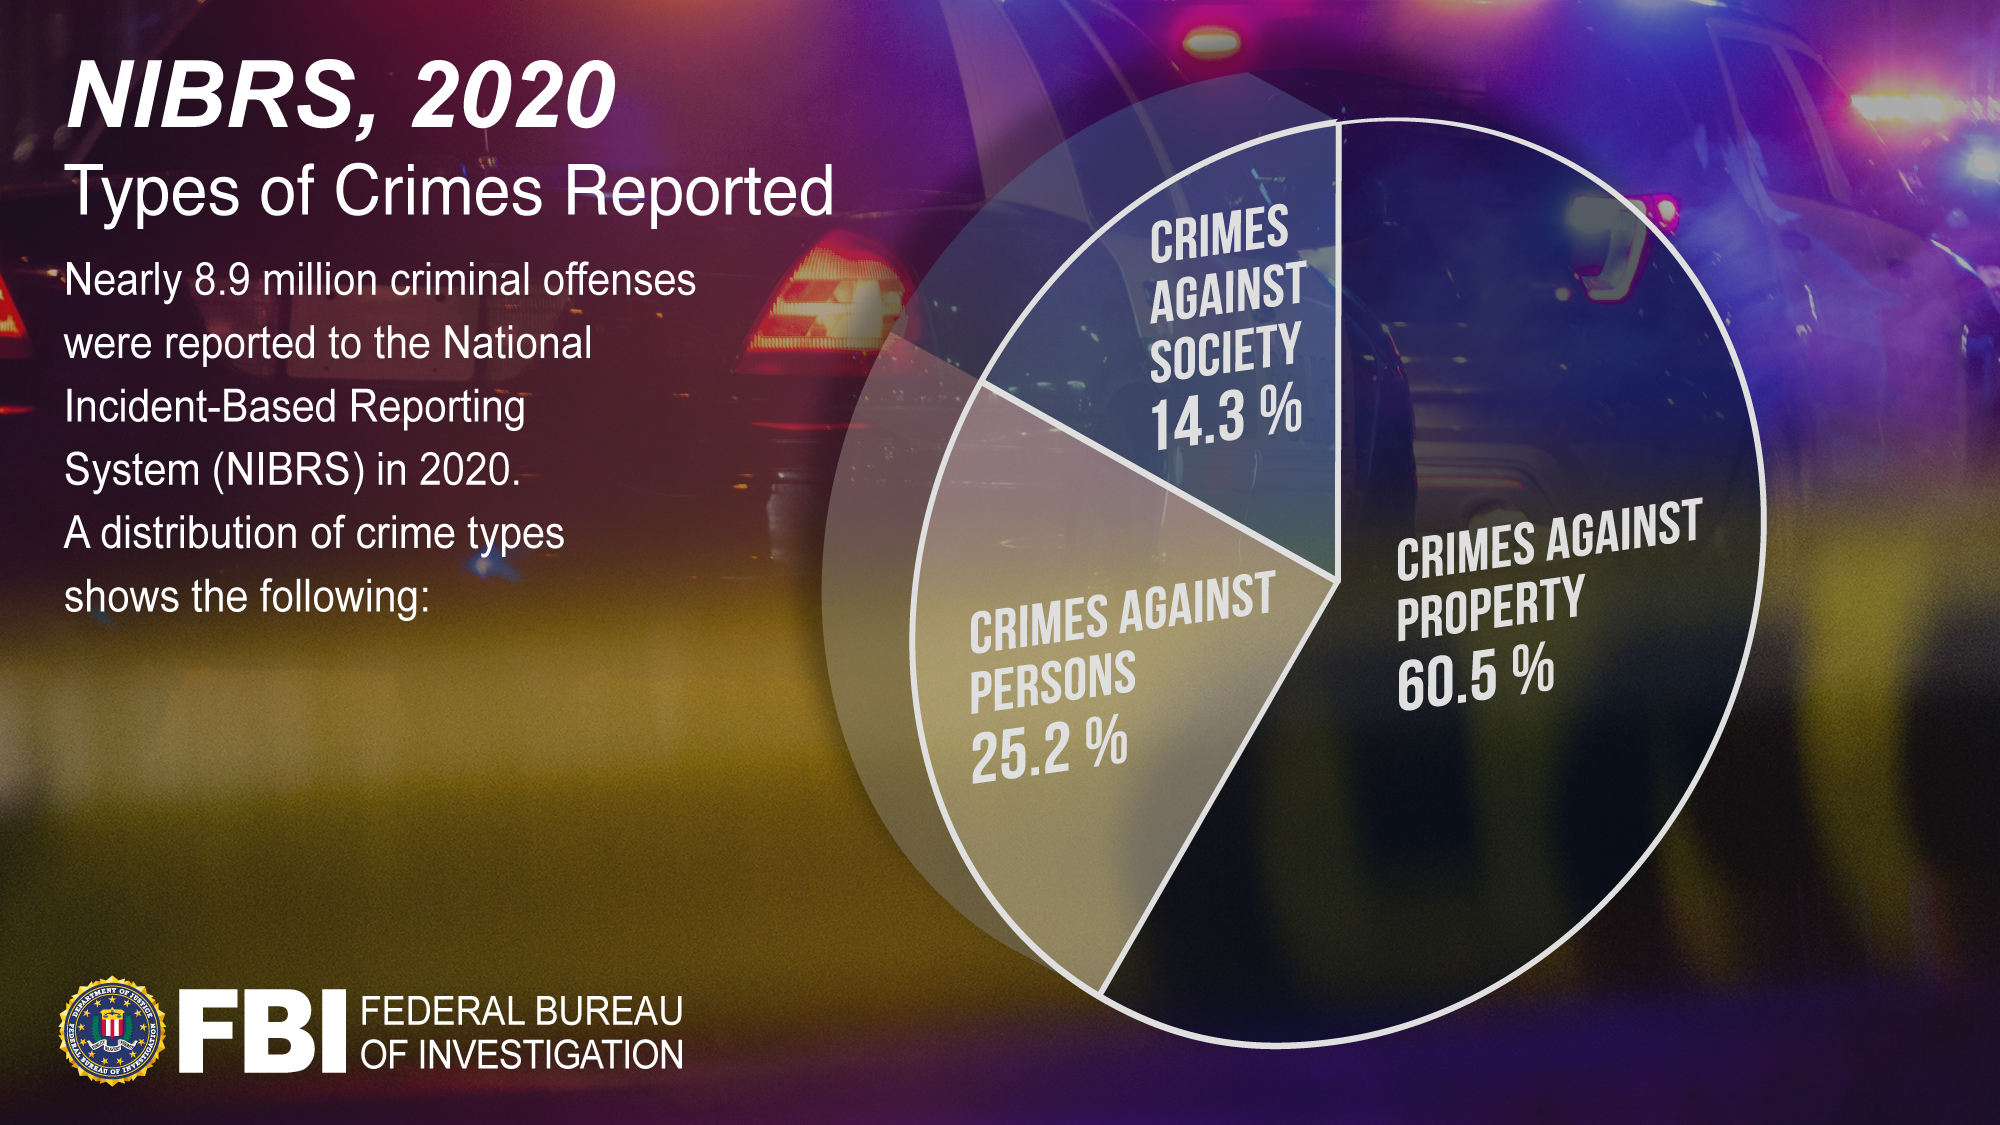 This graphics reads, "NIBRS, 2020" at the top left. Below that, it reads, "Types of Crimes Reported." Below that, it reads, as follows: "Nearly 8.9 million criminal offenses were reported to the National Incident-Based Reporting System (NIBRS) in 2020. A distribution of crimes shows the following:"
To the right of this text, a pie chart shows that crimes against property accounted for 60.5% of the reported offenses, crimes against persons accounted for 25.2% of the reported offenses, and crimes against society accounted for 14.3% of the reported offenses. The FBI seal and text reading "FBI" and "Federal Bureau of Investigation" are located in the bottom lefthand corner of the graphic. The graphic has a blurry, purplish background with hints of red, reminiscent of police lights.